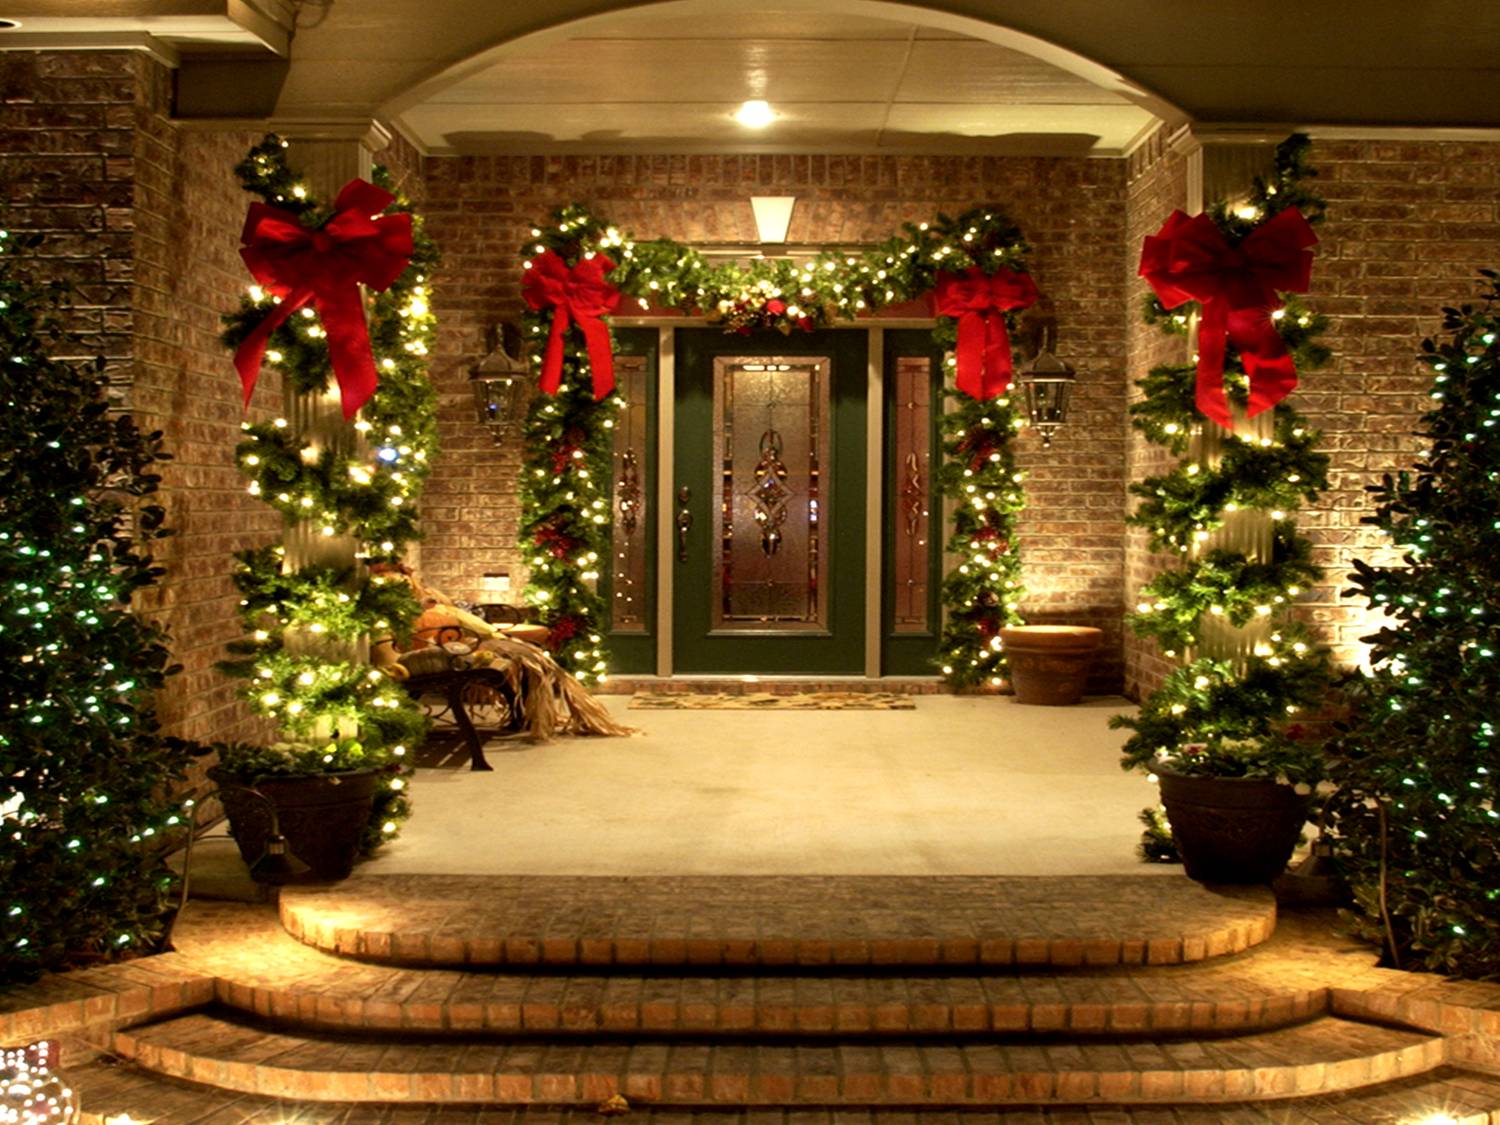 Example of Christmas Decor by Swingle - Entrance